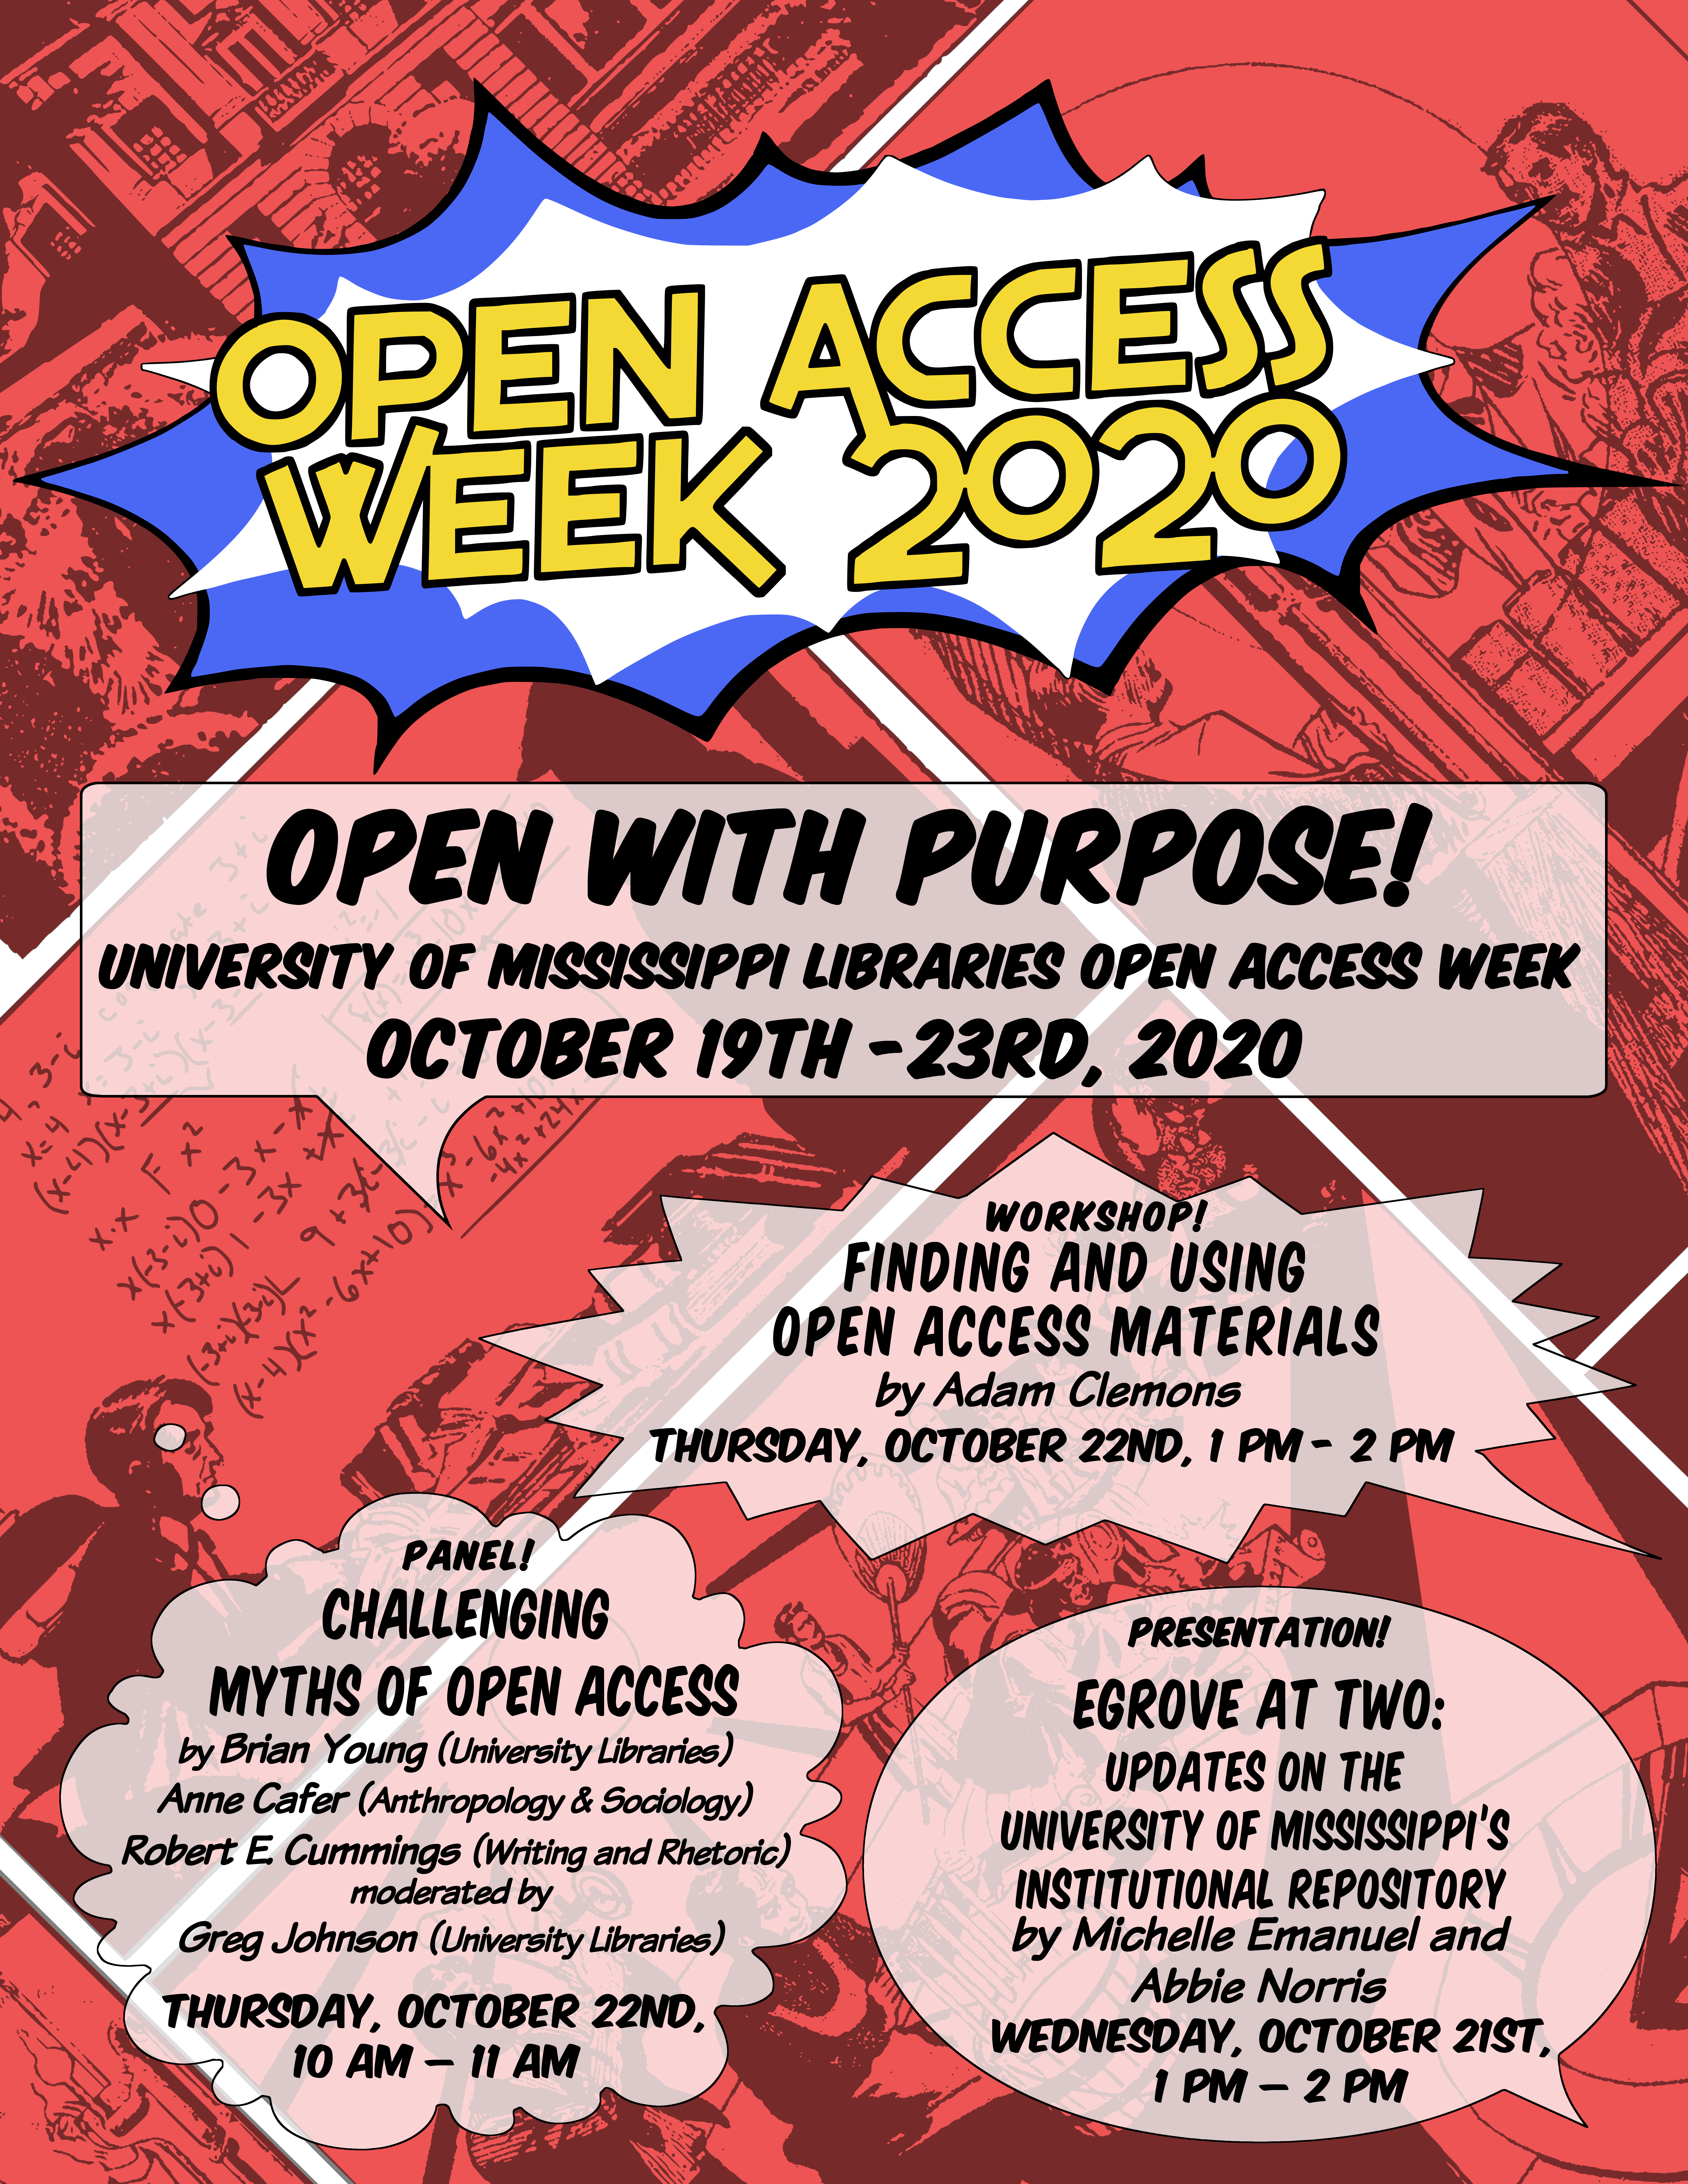 Open with Purpose: Open Access Week 2020